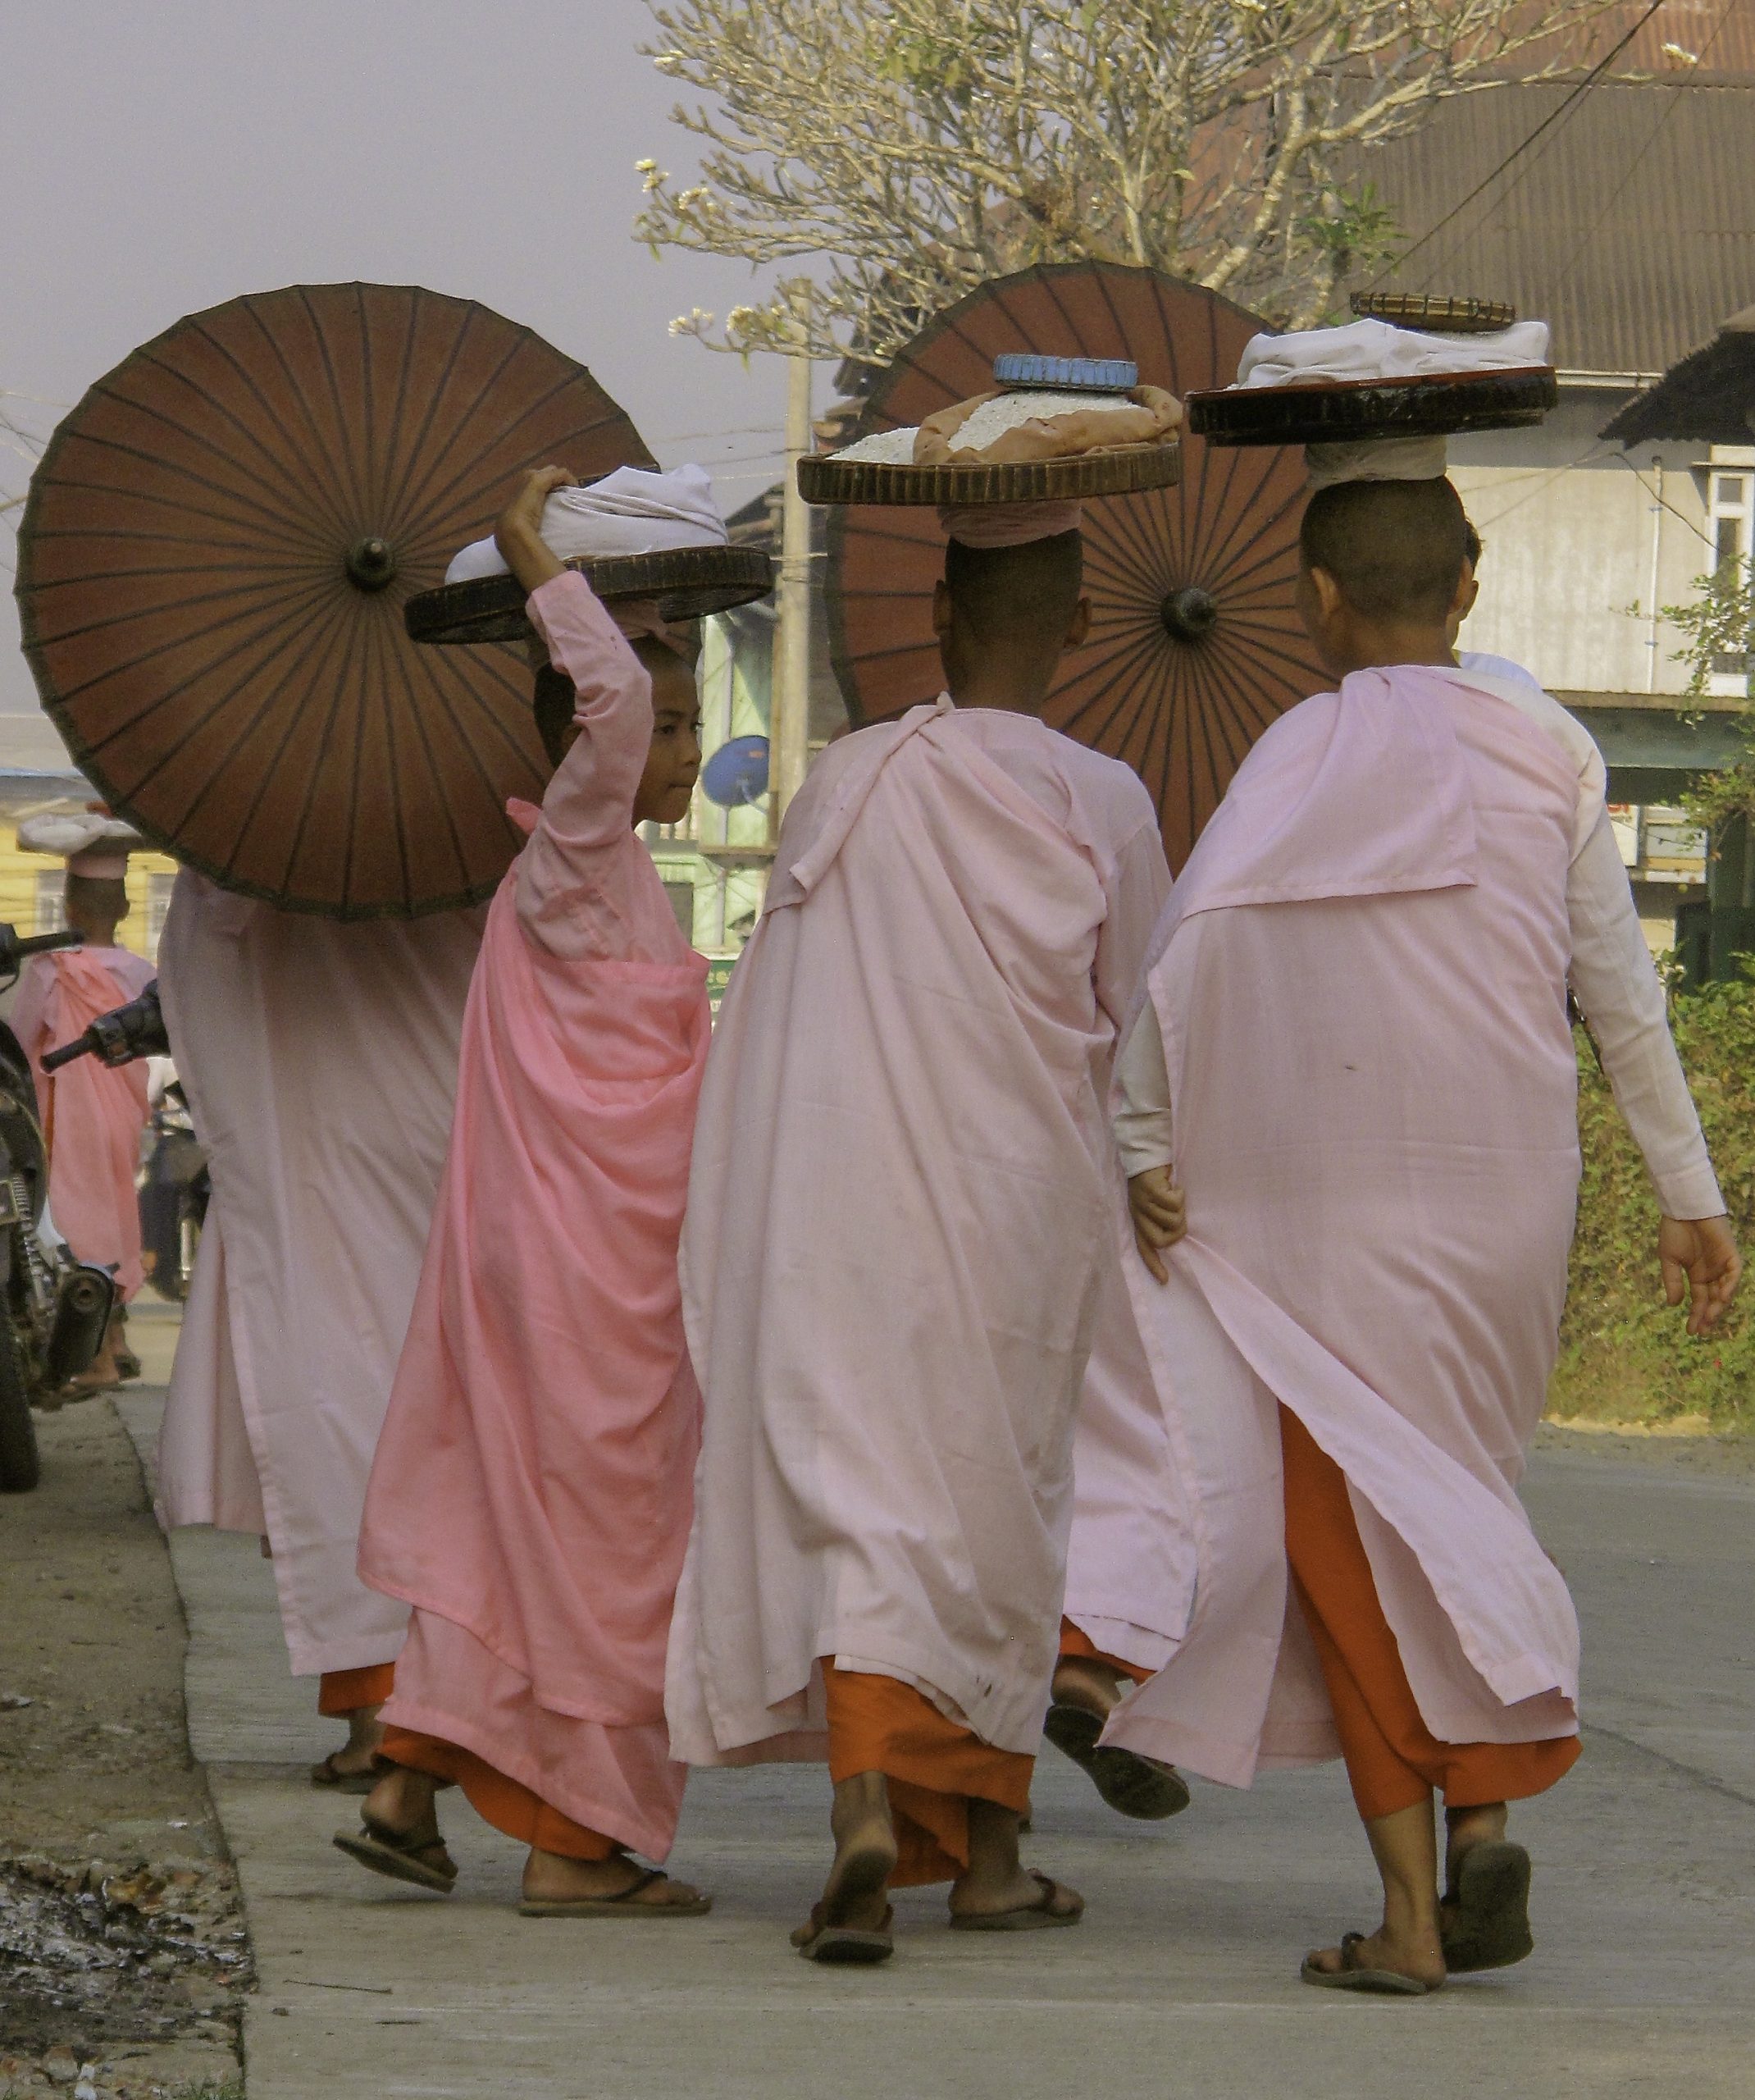 Boys dressed in orange and light-coloured robes walking. Three boys move away showing their backs. They are carrying light weight packages on their heads. Some have parasols.